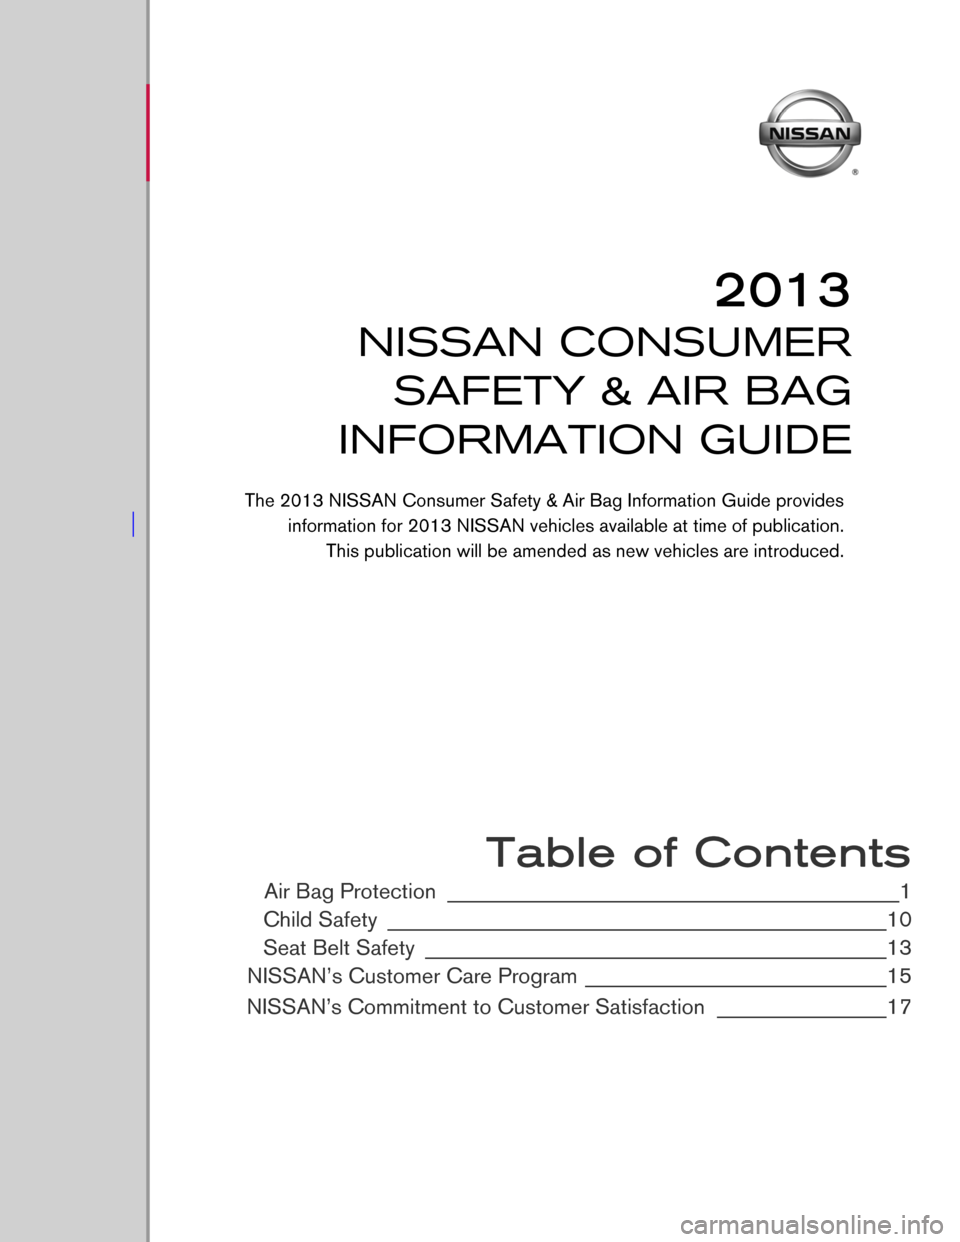 NISSAN SENTRA 2013 B17 / 7.G Consumer Safety Air Bag Information Guide  
 
 
 
 
 
 
 
 
 
 
 
 
 
 
 
 
 
 
 
 
 
 
 Table of Contents
Air Bag Protection ________________________________________________1
Child Safety
 ____________________________________________________